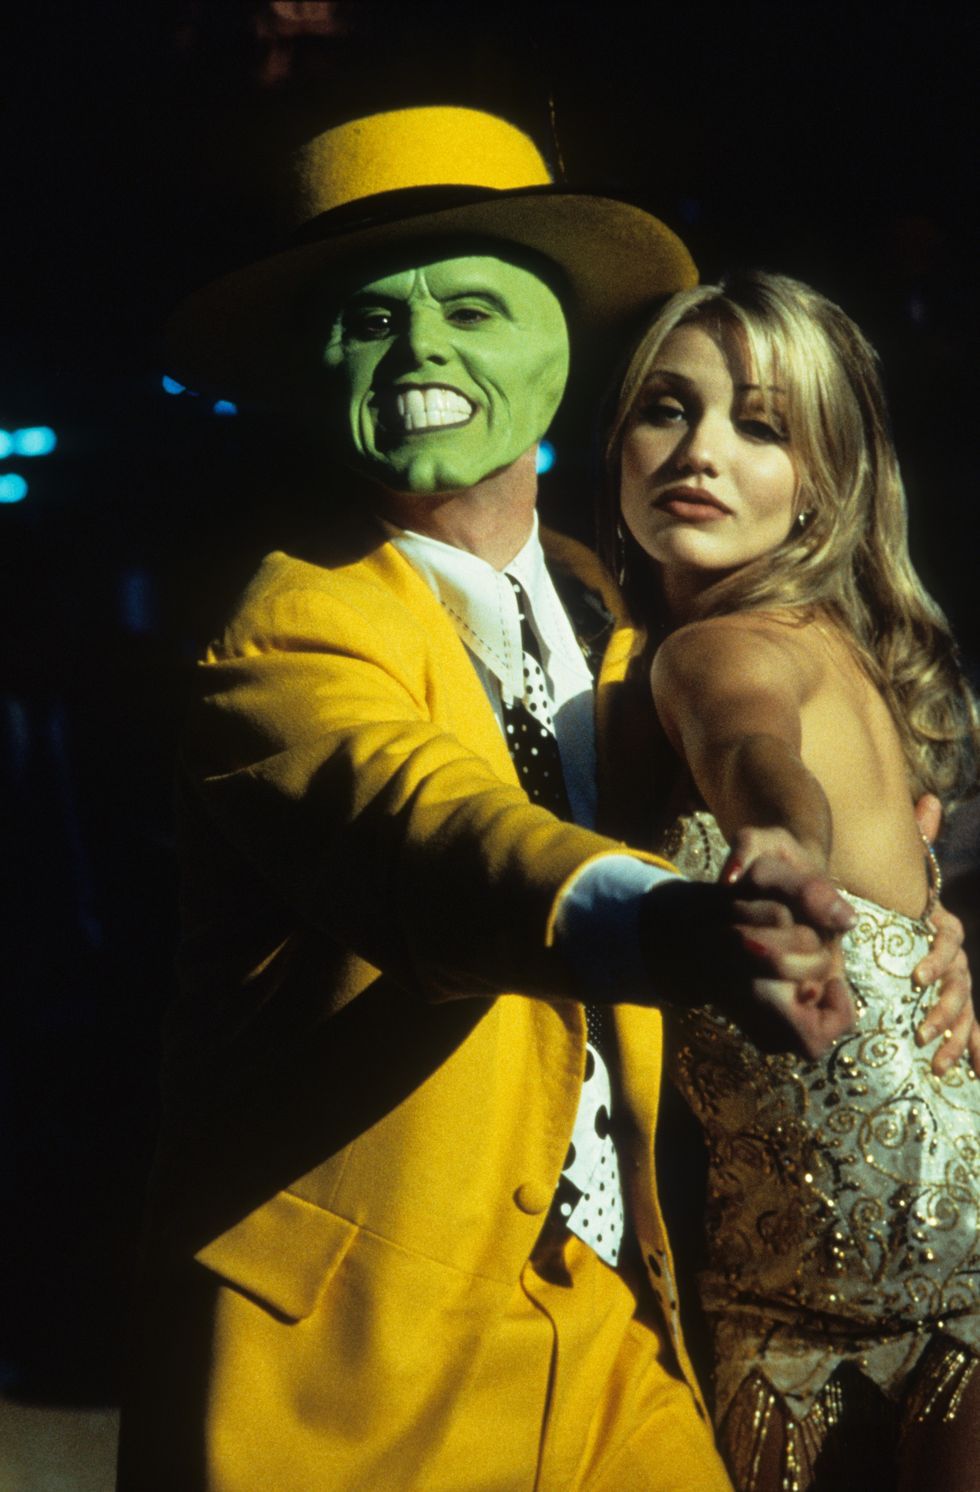 Jim Carrey And Cameron Diaz In 'The Mask'